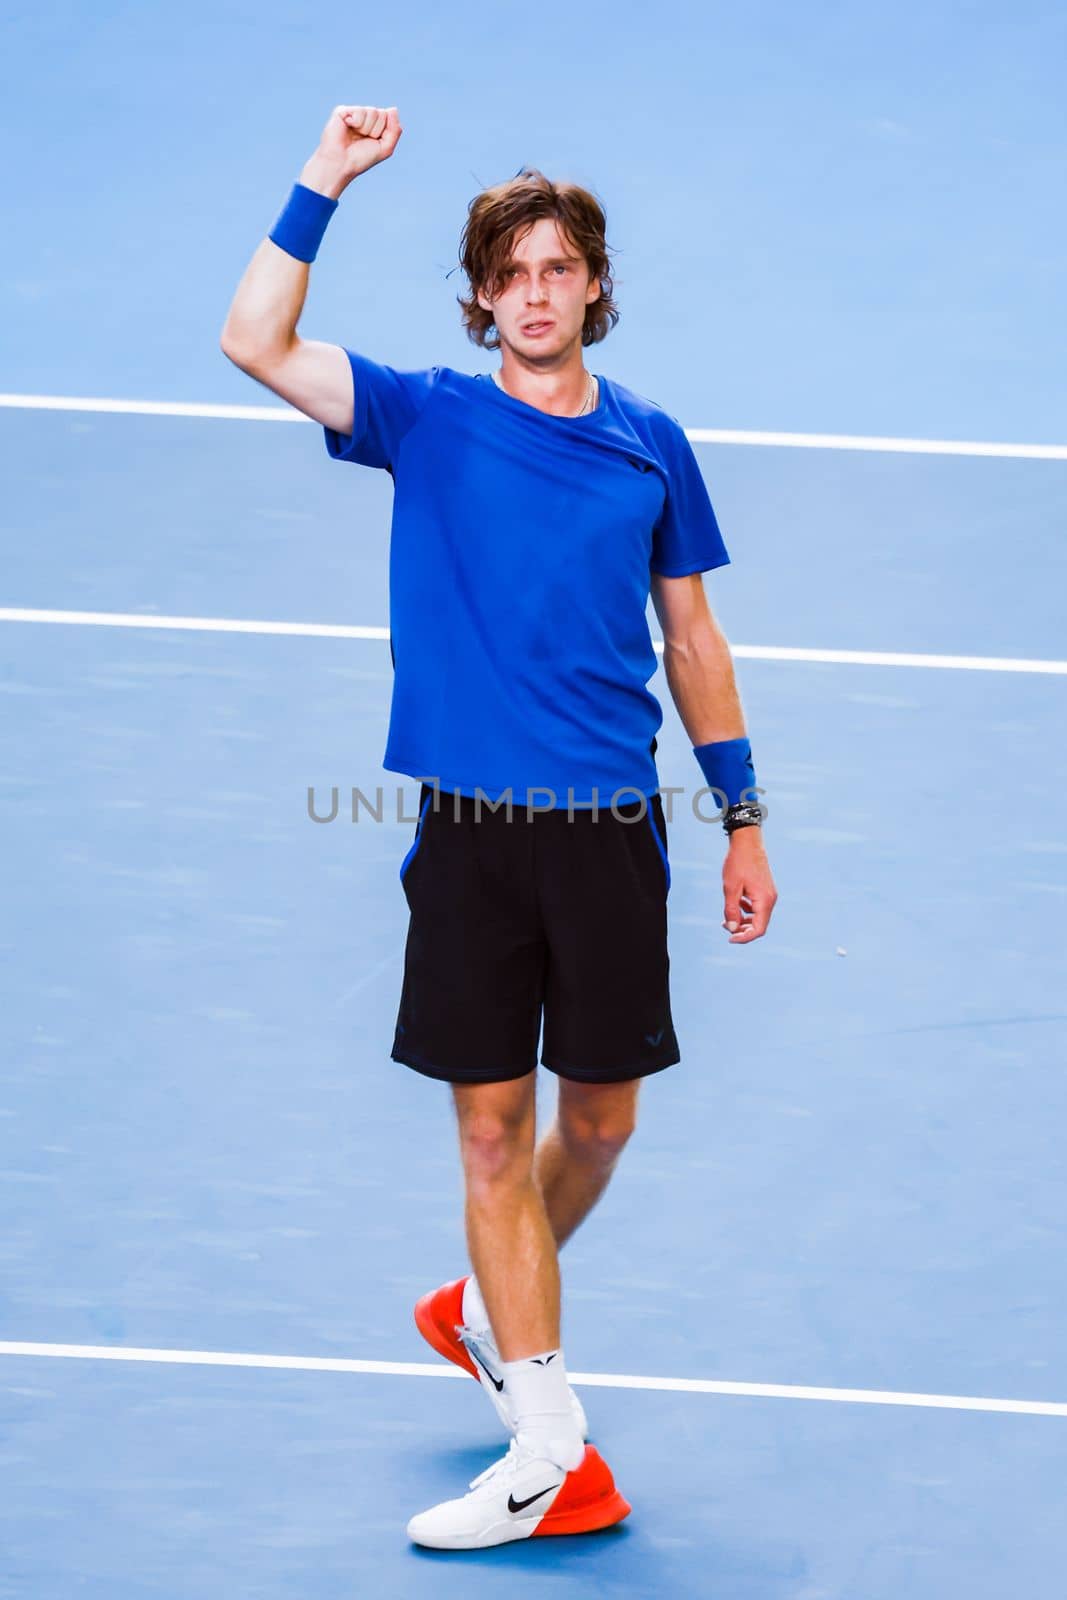 MELBOURNE, AUSTRALIA - JANUARY 23: Andrey Rublev of Russia plays Holger Rune of Denmark in the 4th round on day 8 of the 2023 Australian Open at Melbourne Park on January 23, 2023 in Melbourne, Australia.